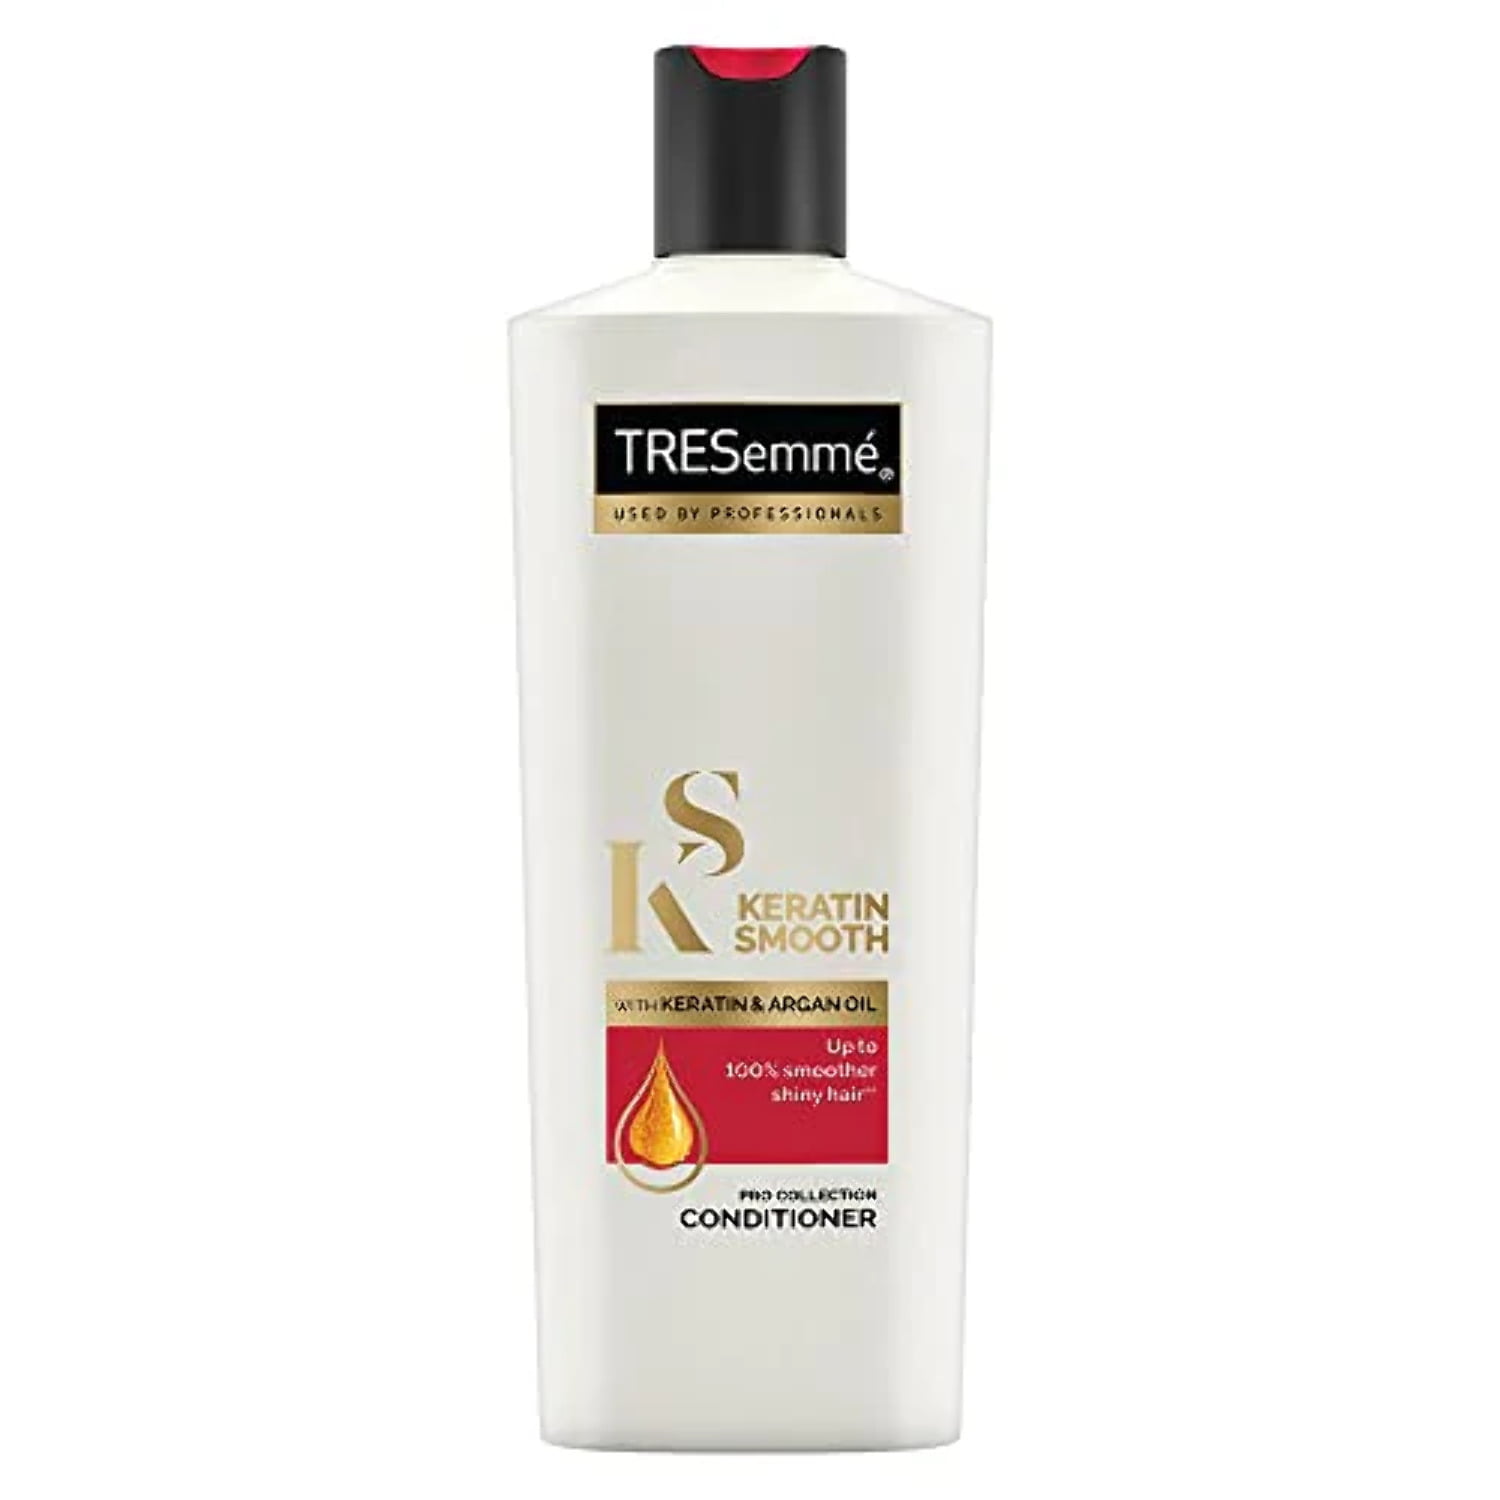 TRESemme Keratin Smooth Conditioner 190 ml, With Keratin Argan Oil for  Straight, Shiny Hair - Nourishes Dry Hair Controls Frizz, For Men Women -  